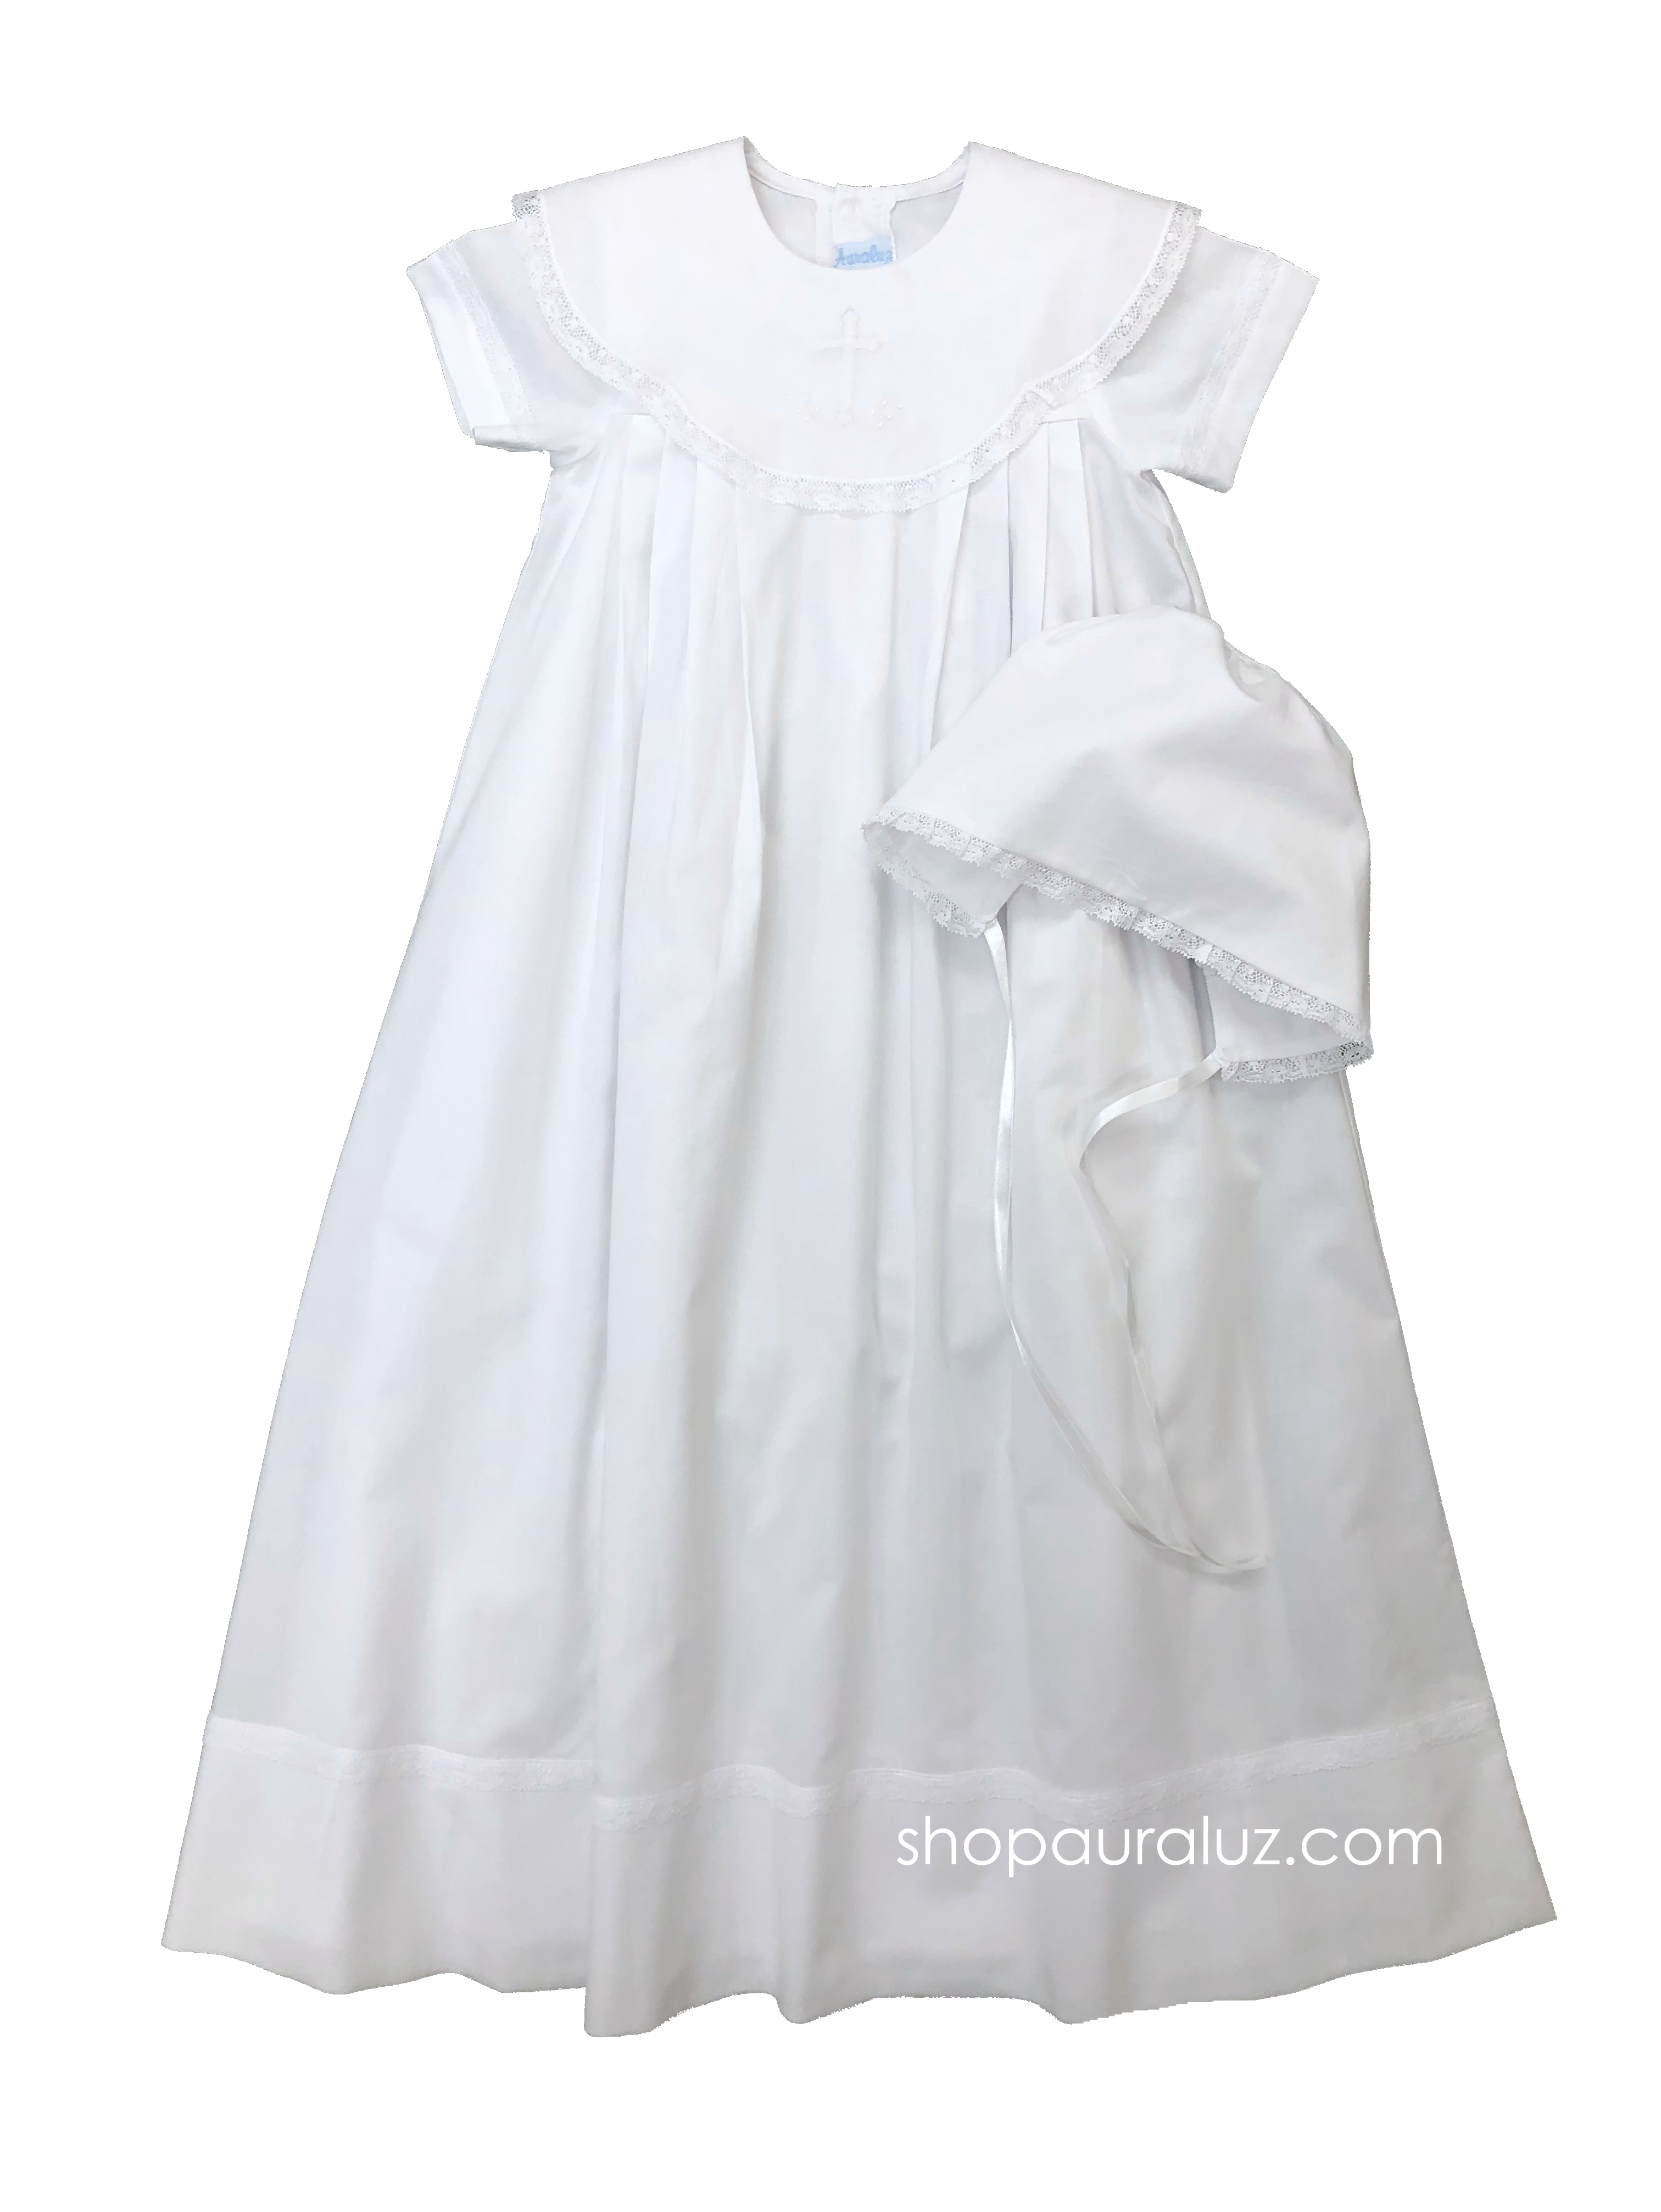 Auraluz Christening Gown/Slip/Hat...White with white lace, scalloped round collar and embroidered cross